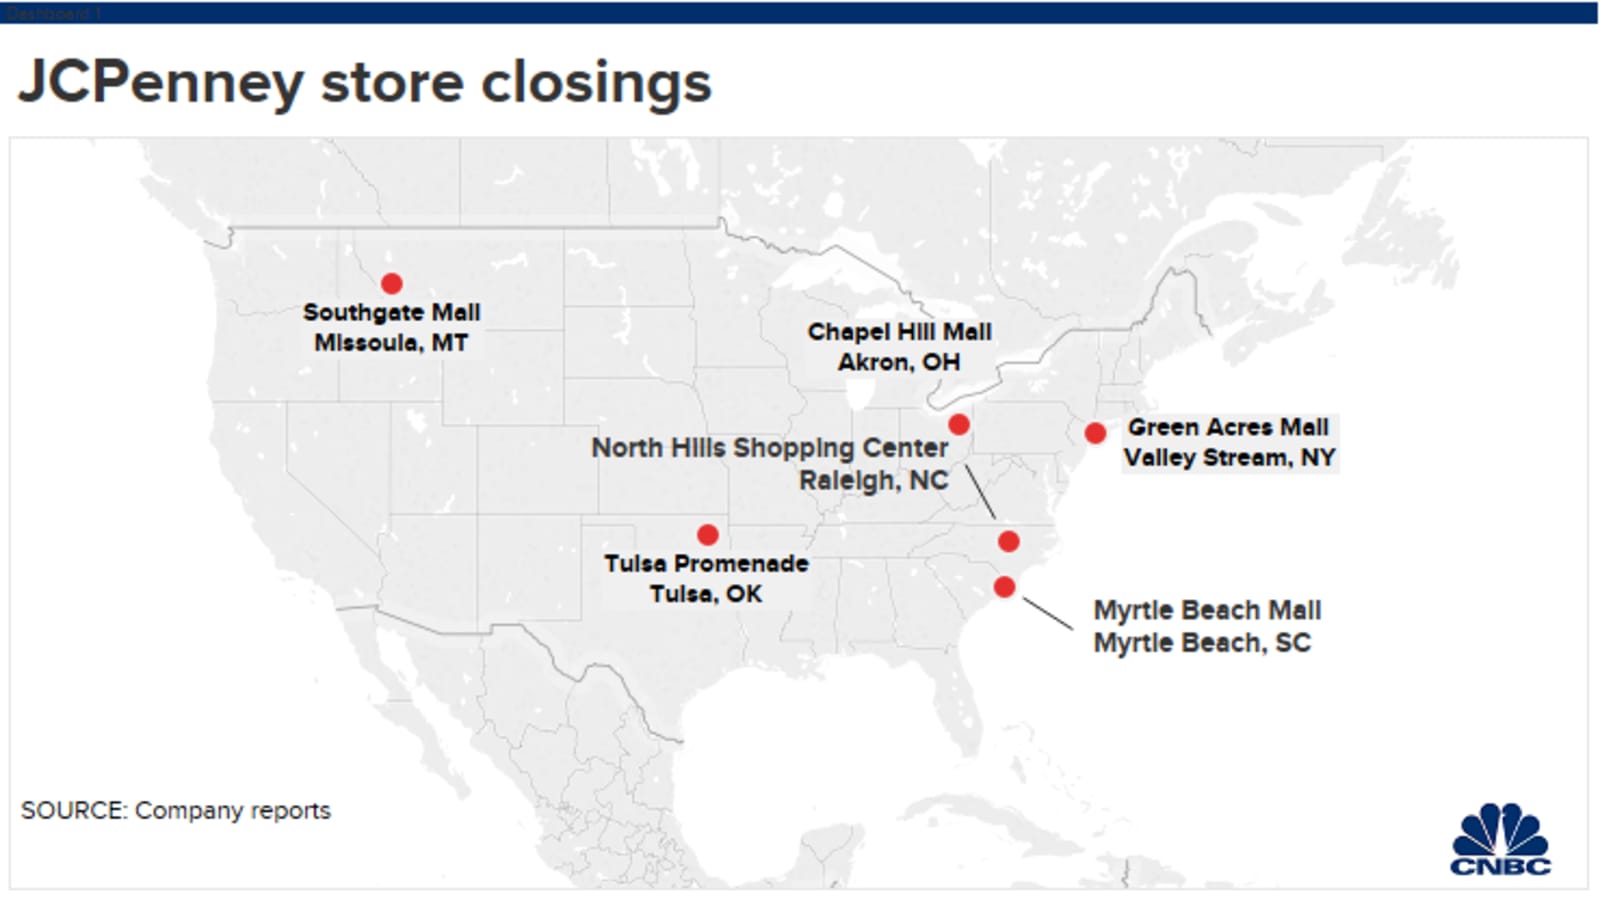 Jc Penney Is Closing 6 Stores This Year Here S Where They Are